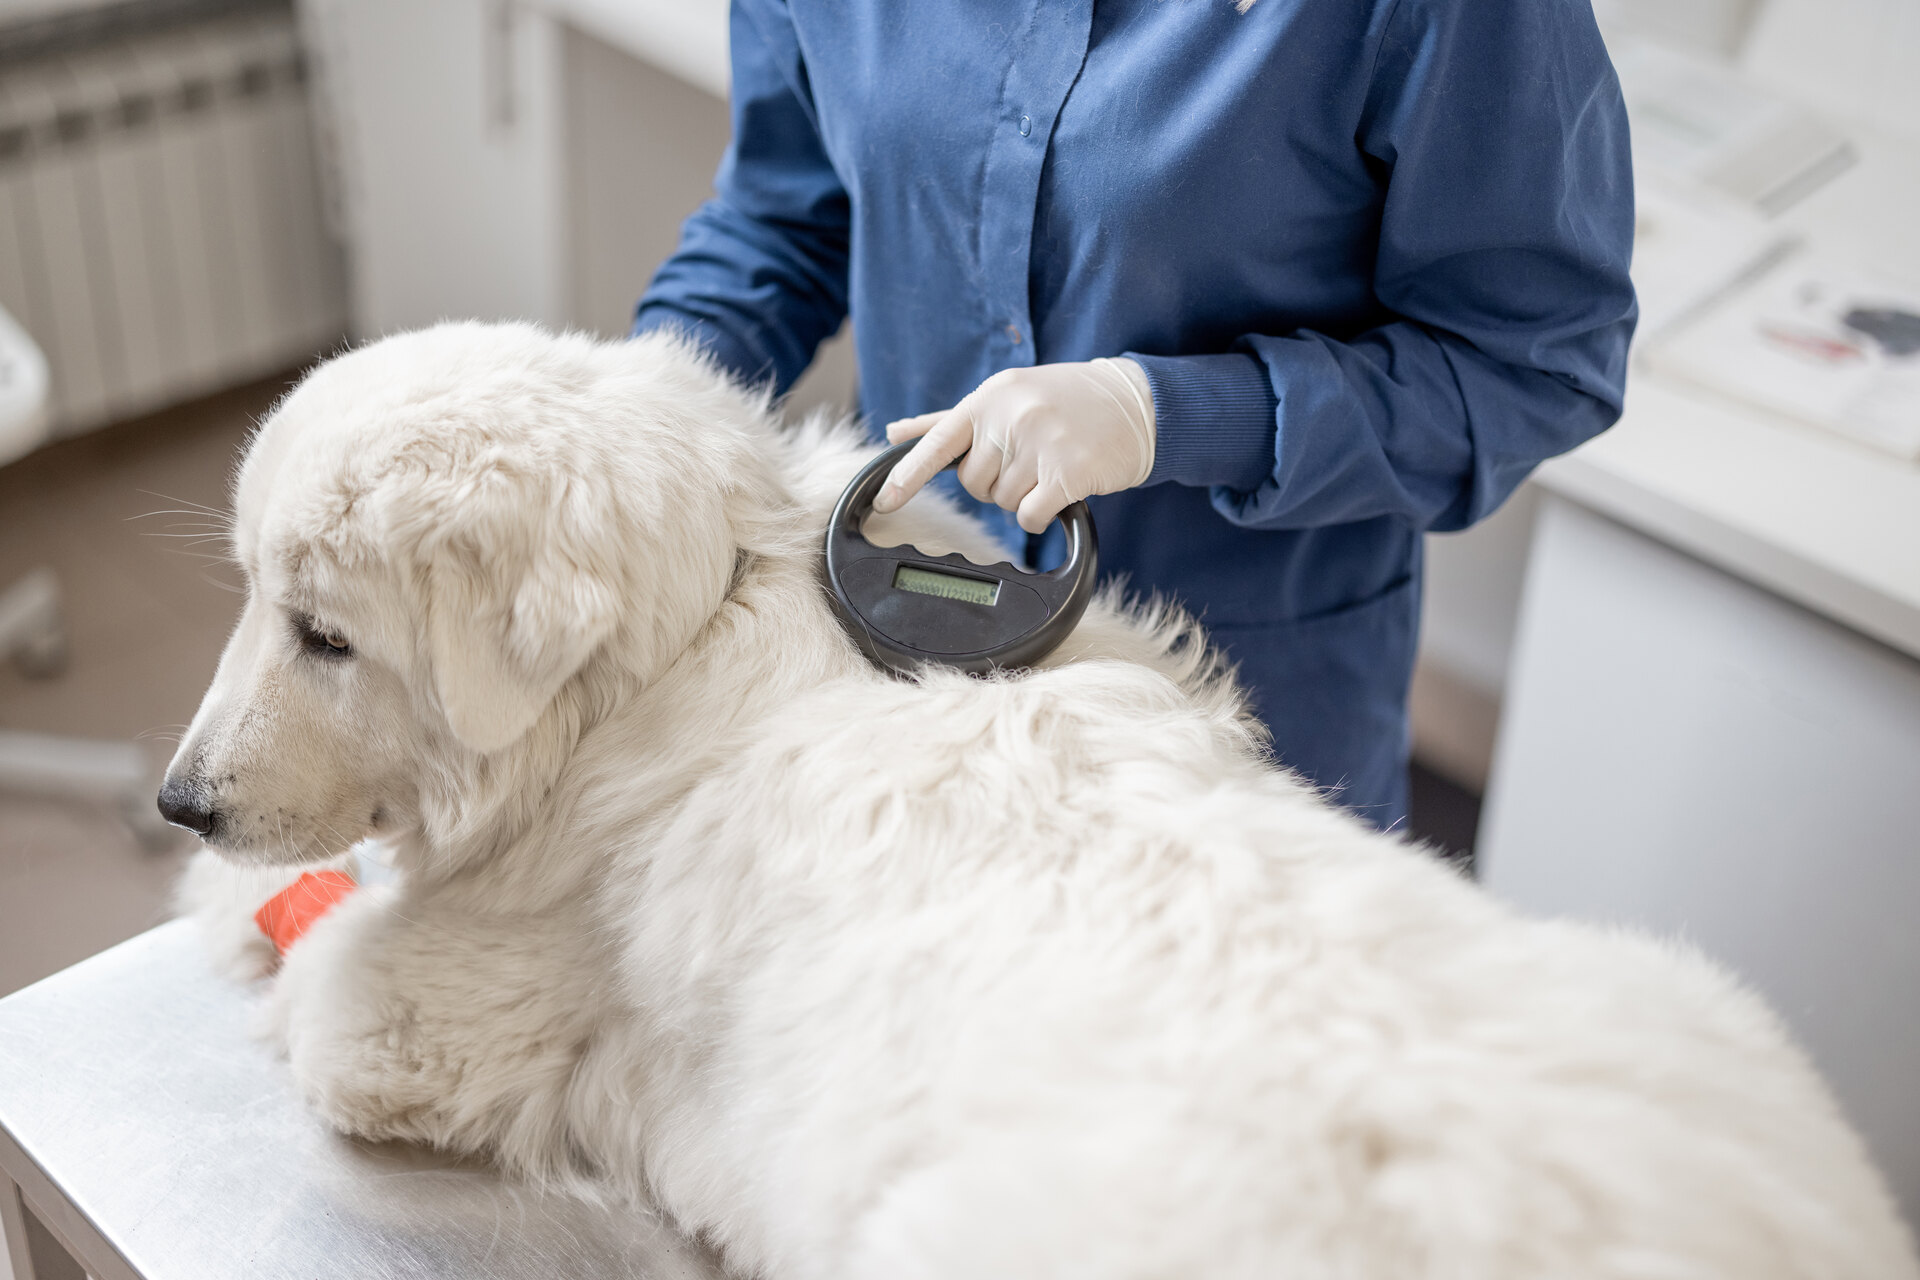 A vet scanning a dog for a microchip